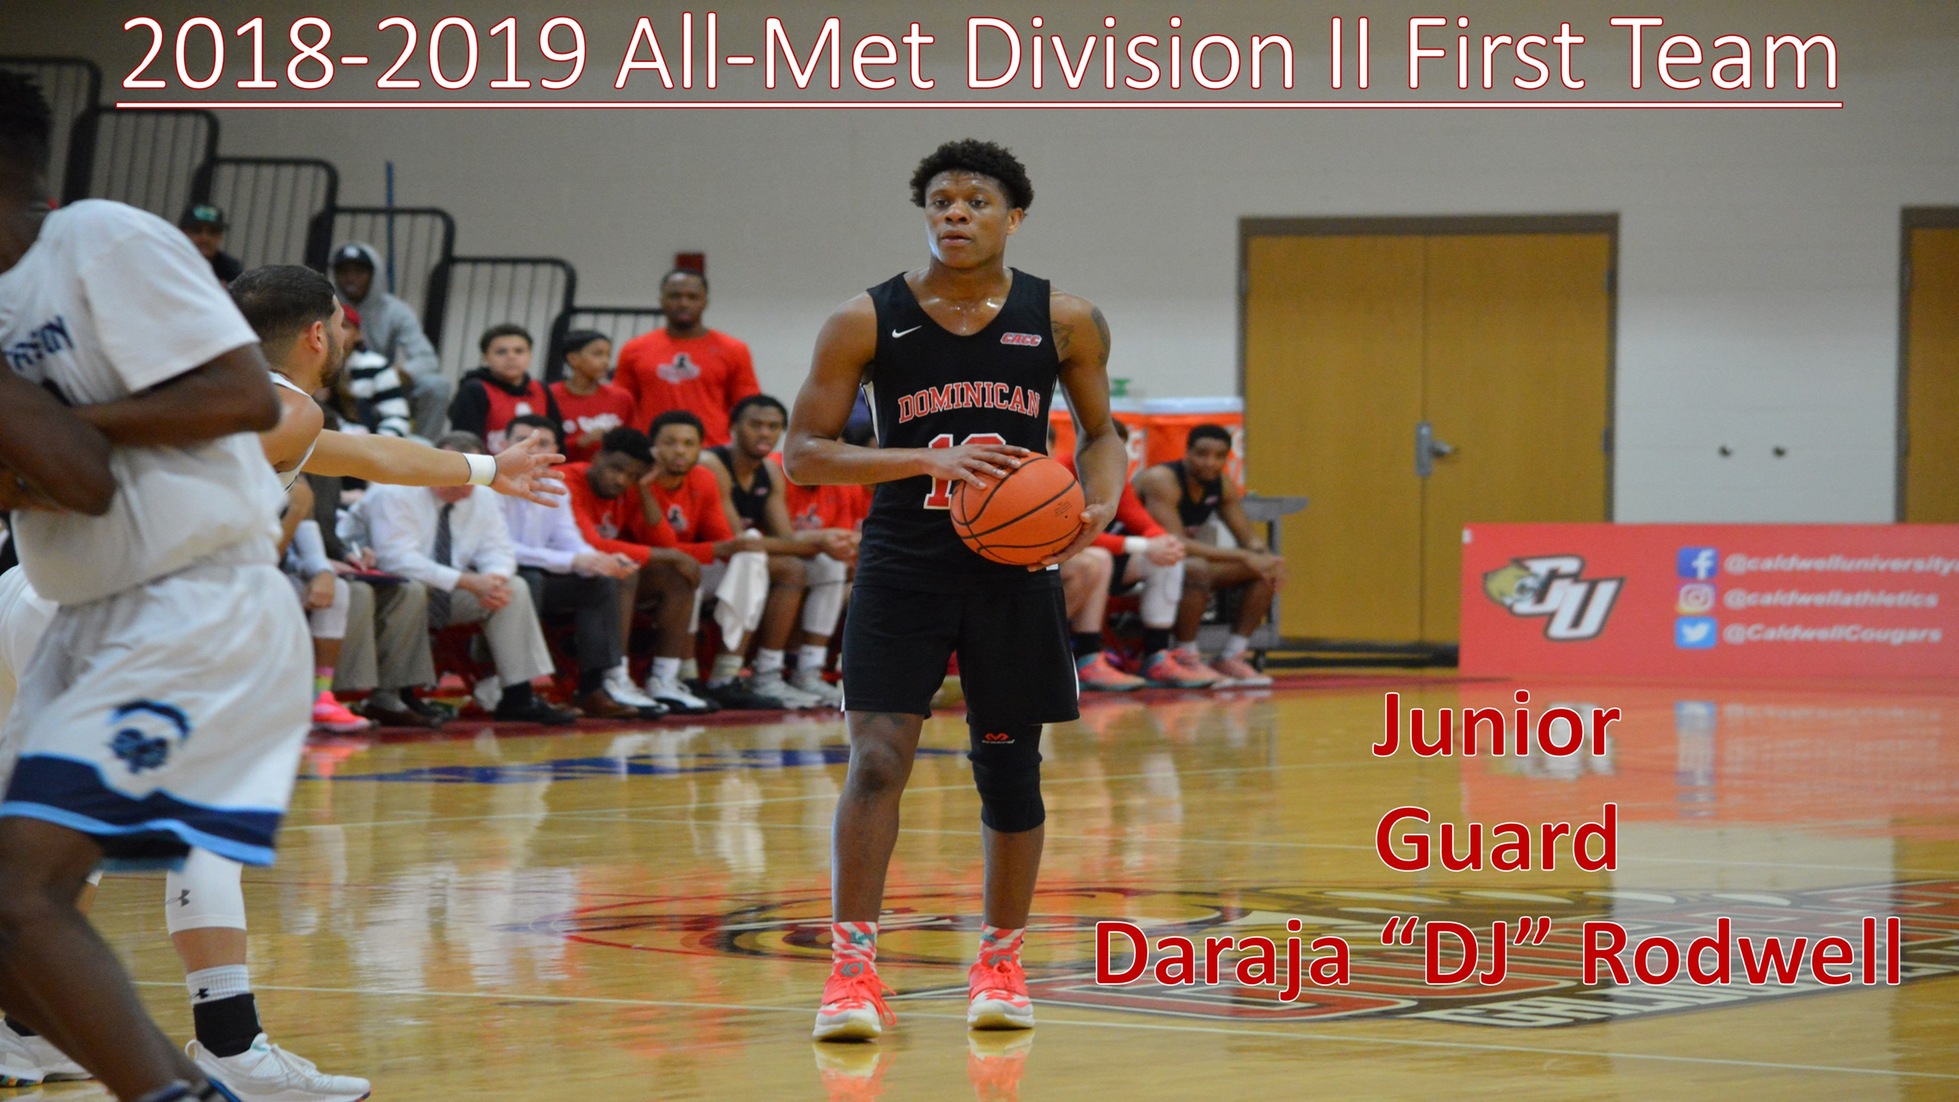 DOMINICAN'S RODWELL NAMED TO 2018-2019 ALL-MET FIRST TEAM